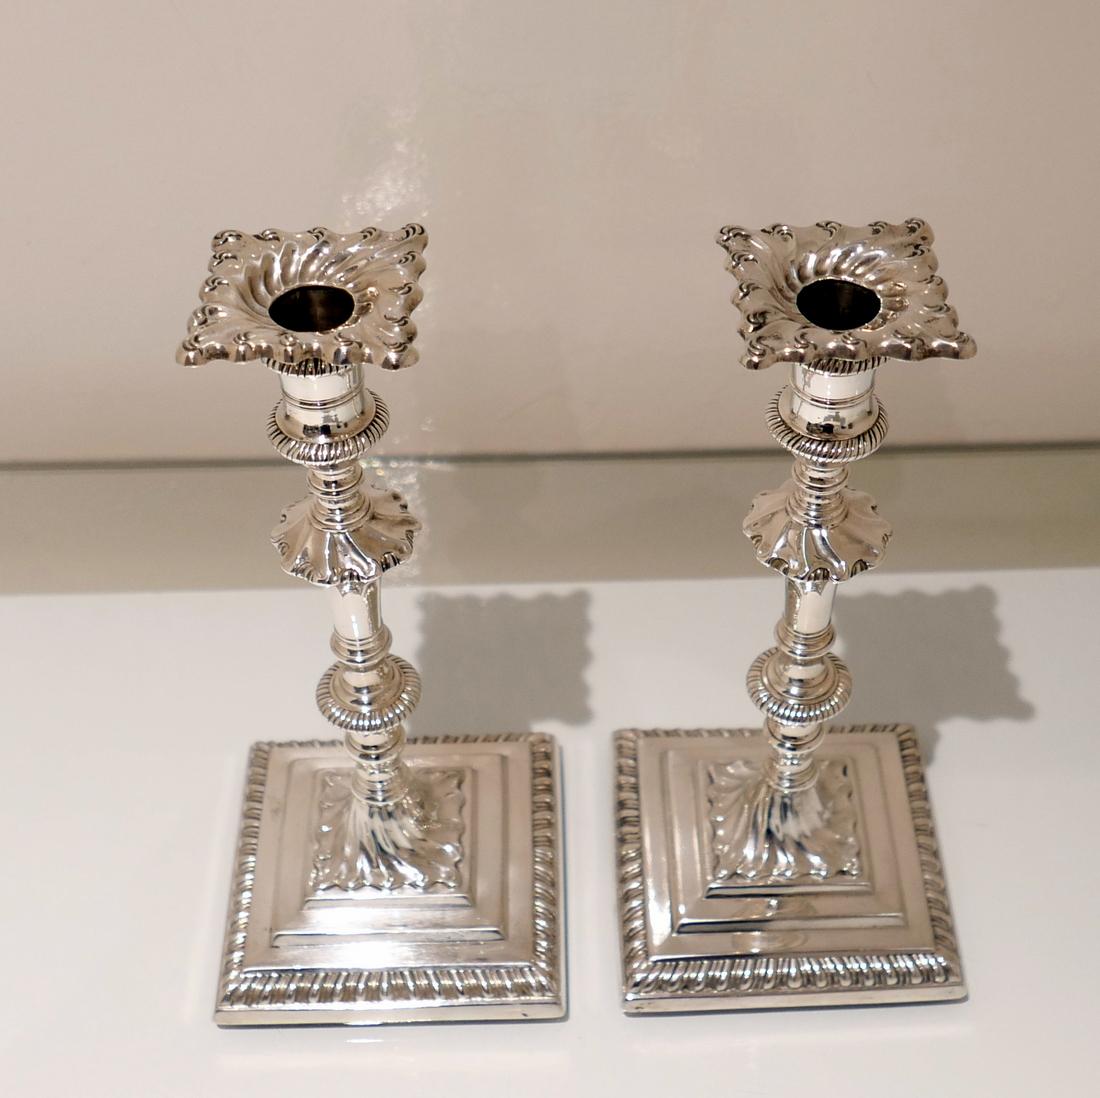 A very elegant pair of silver Georgian candlesticks decorated with gadroon borders and swirl fluted “stepped” bases. The central stems have delightful contemporary crests and the detachable nozzles have additional swirl flute decoration, 18th